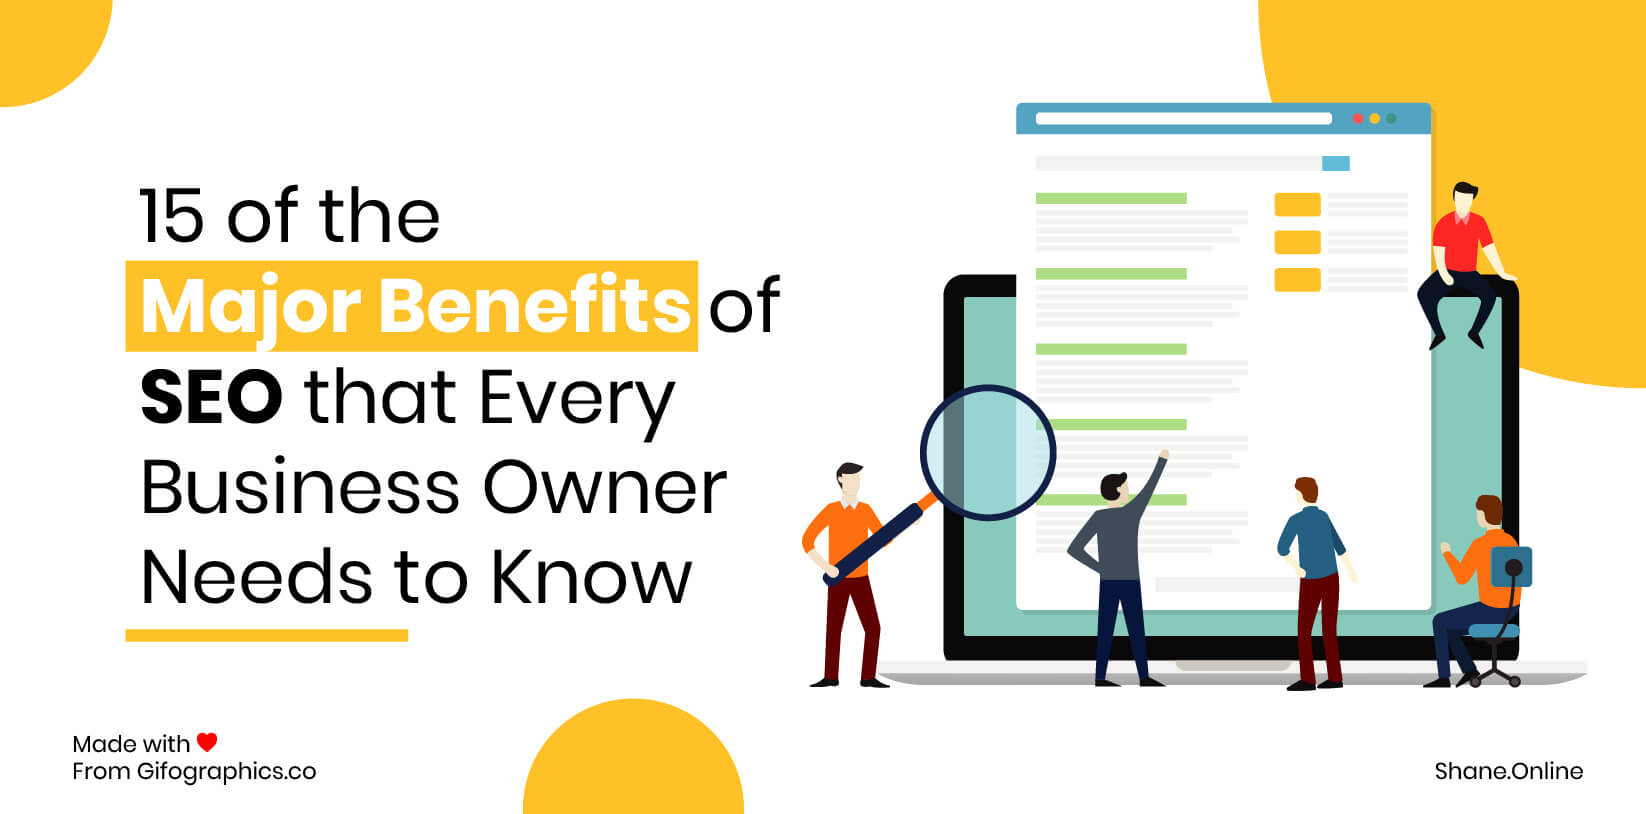 15 of the Major SEO Benefits for Business that Every Owner Needs to Know